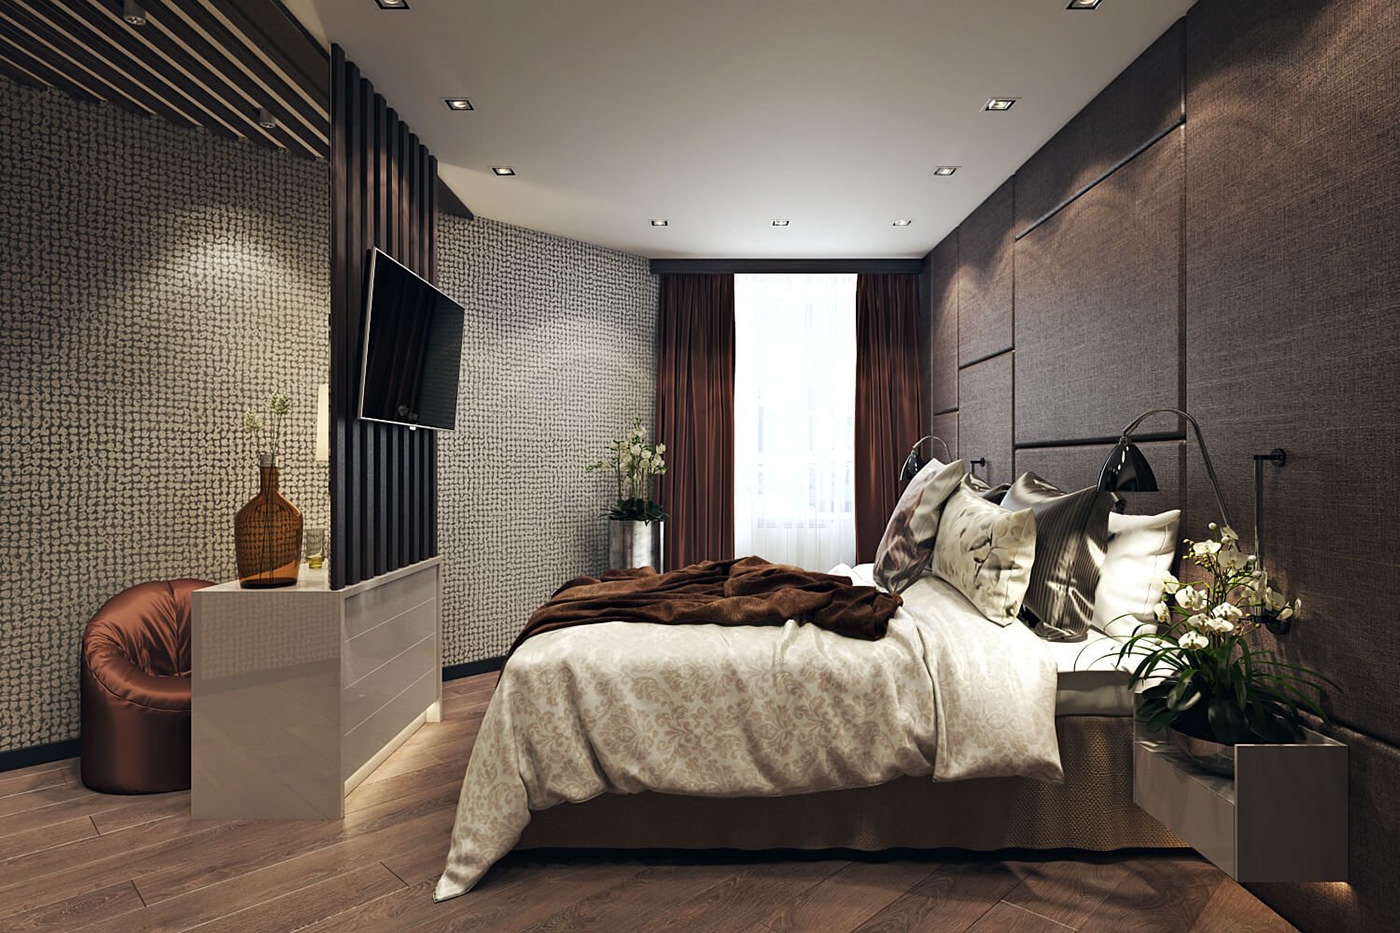 Architectural rendering CGI CGI images visualization bedroom design bedroom designer rendering Rendering Services bed